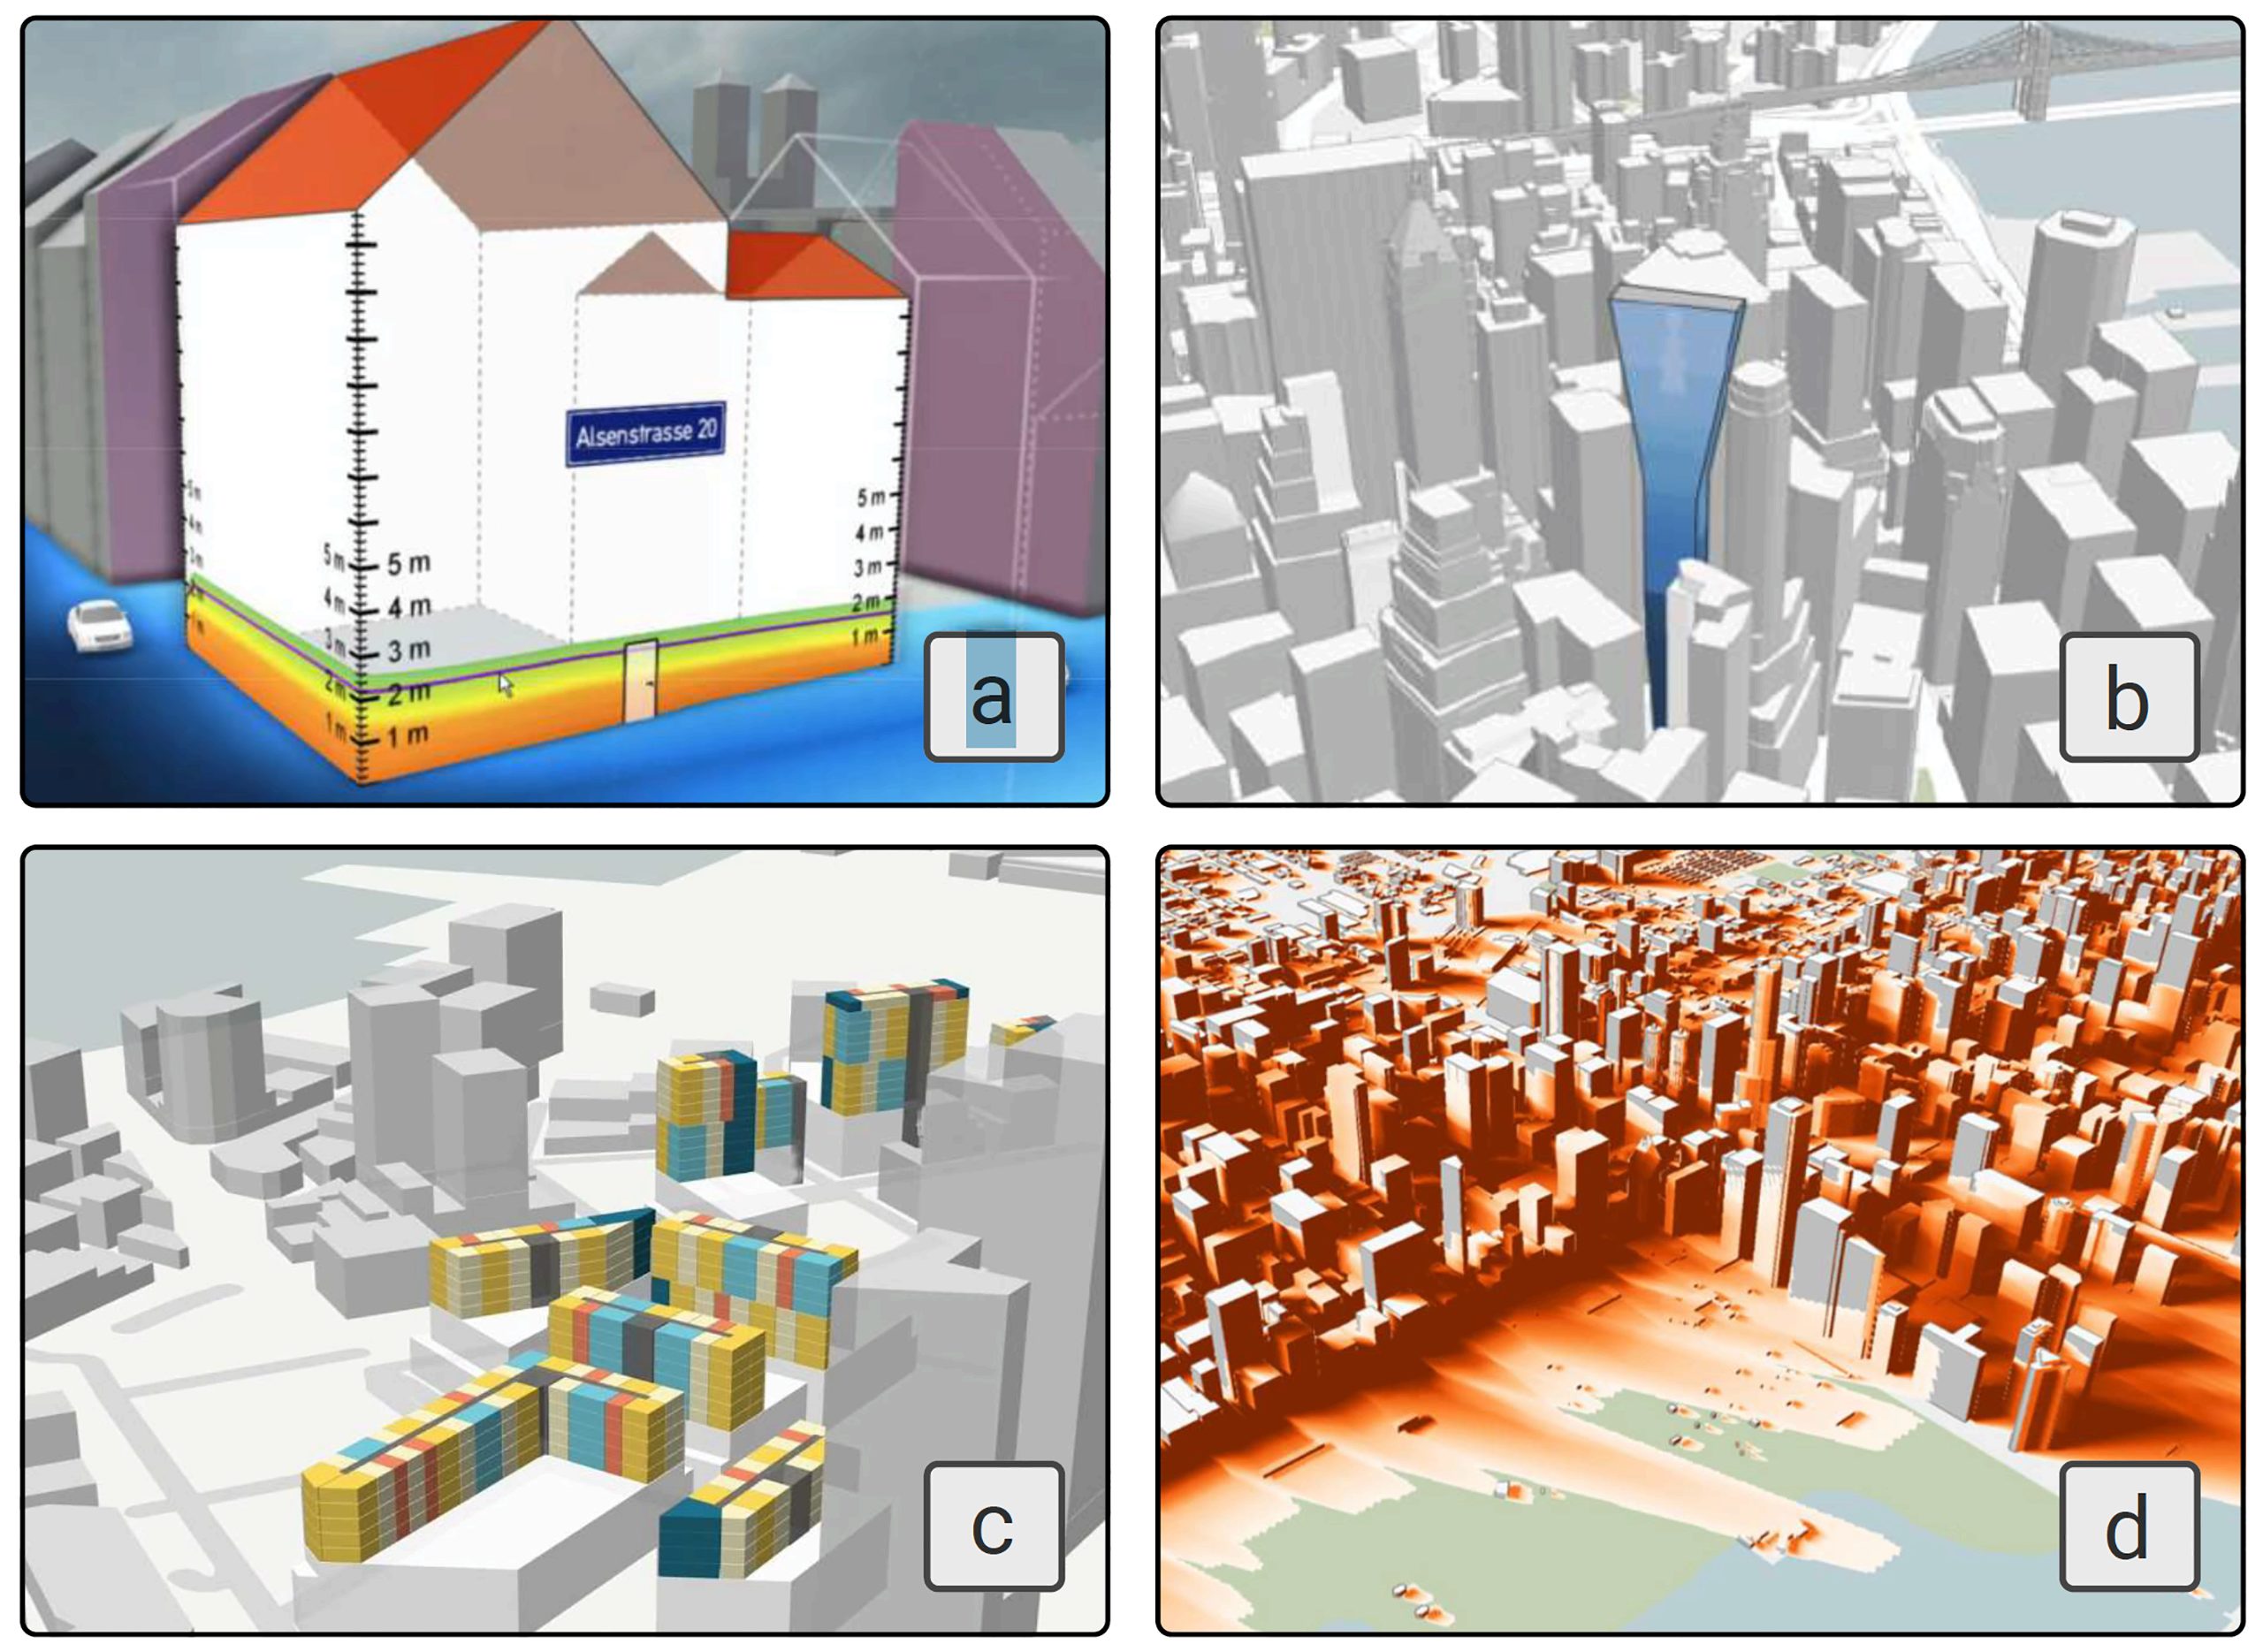 Urban surface data from different domains: (a)flooding simulation analysis-environment, (b)view impact analysis-urban planning, (c)building design performance analysis-urban design, (d)solar potential & sunlight analysis-urban design/architecture